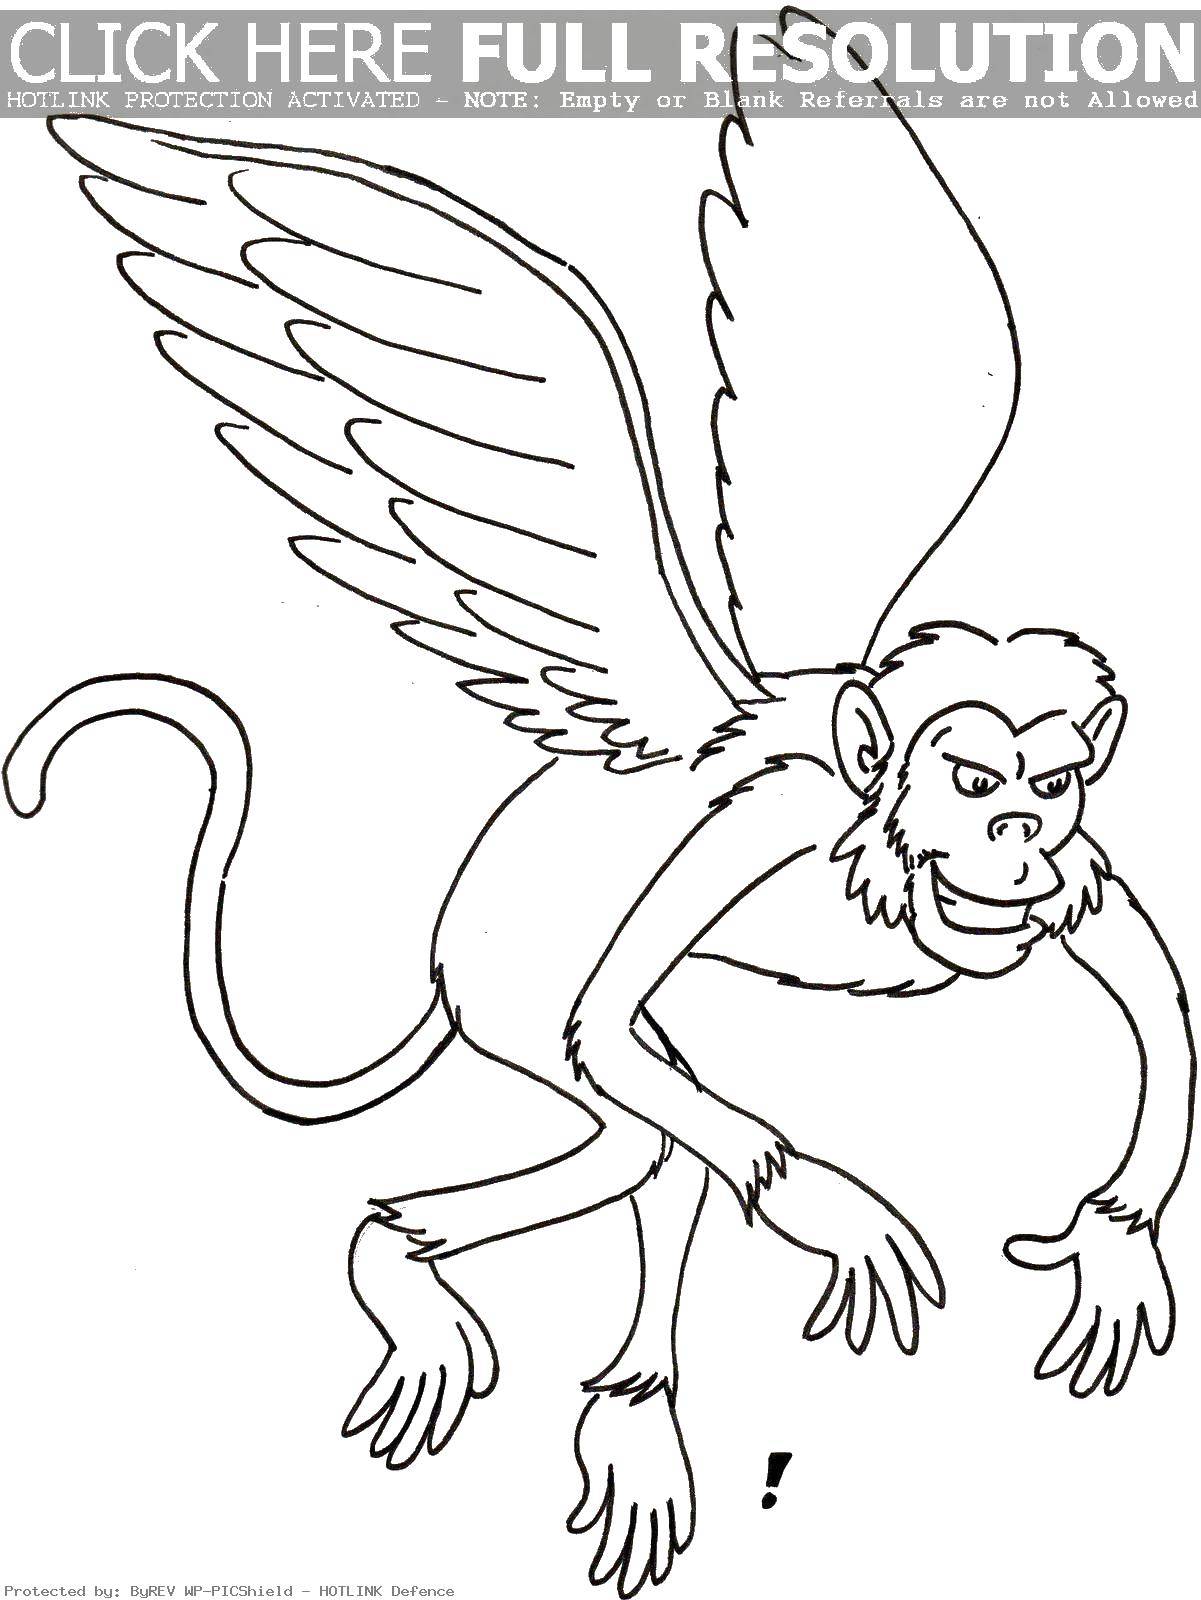 Coloring A monkey with wings. Category The magic of creation. Tags:  Magic create.